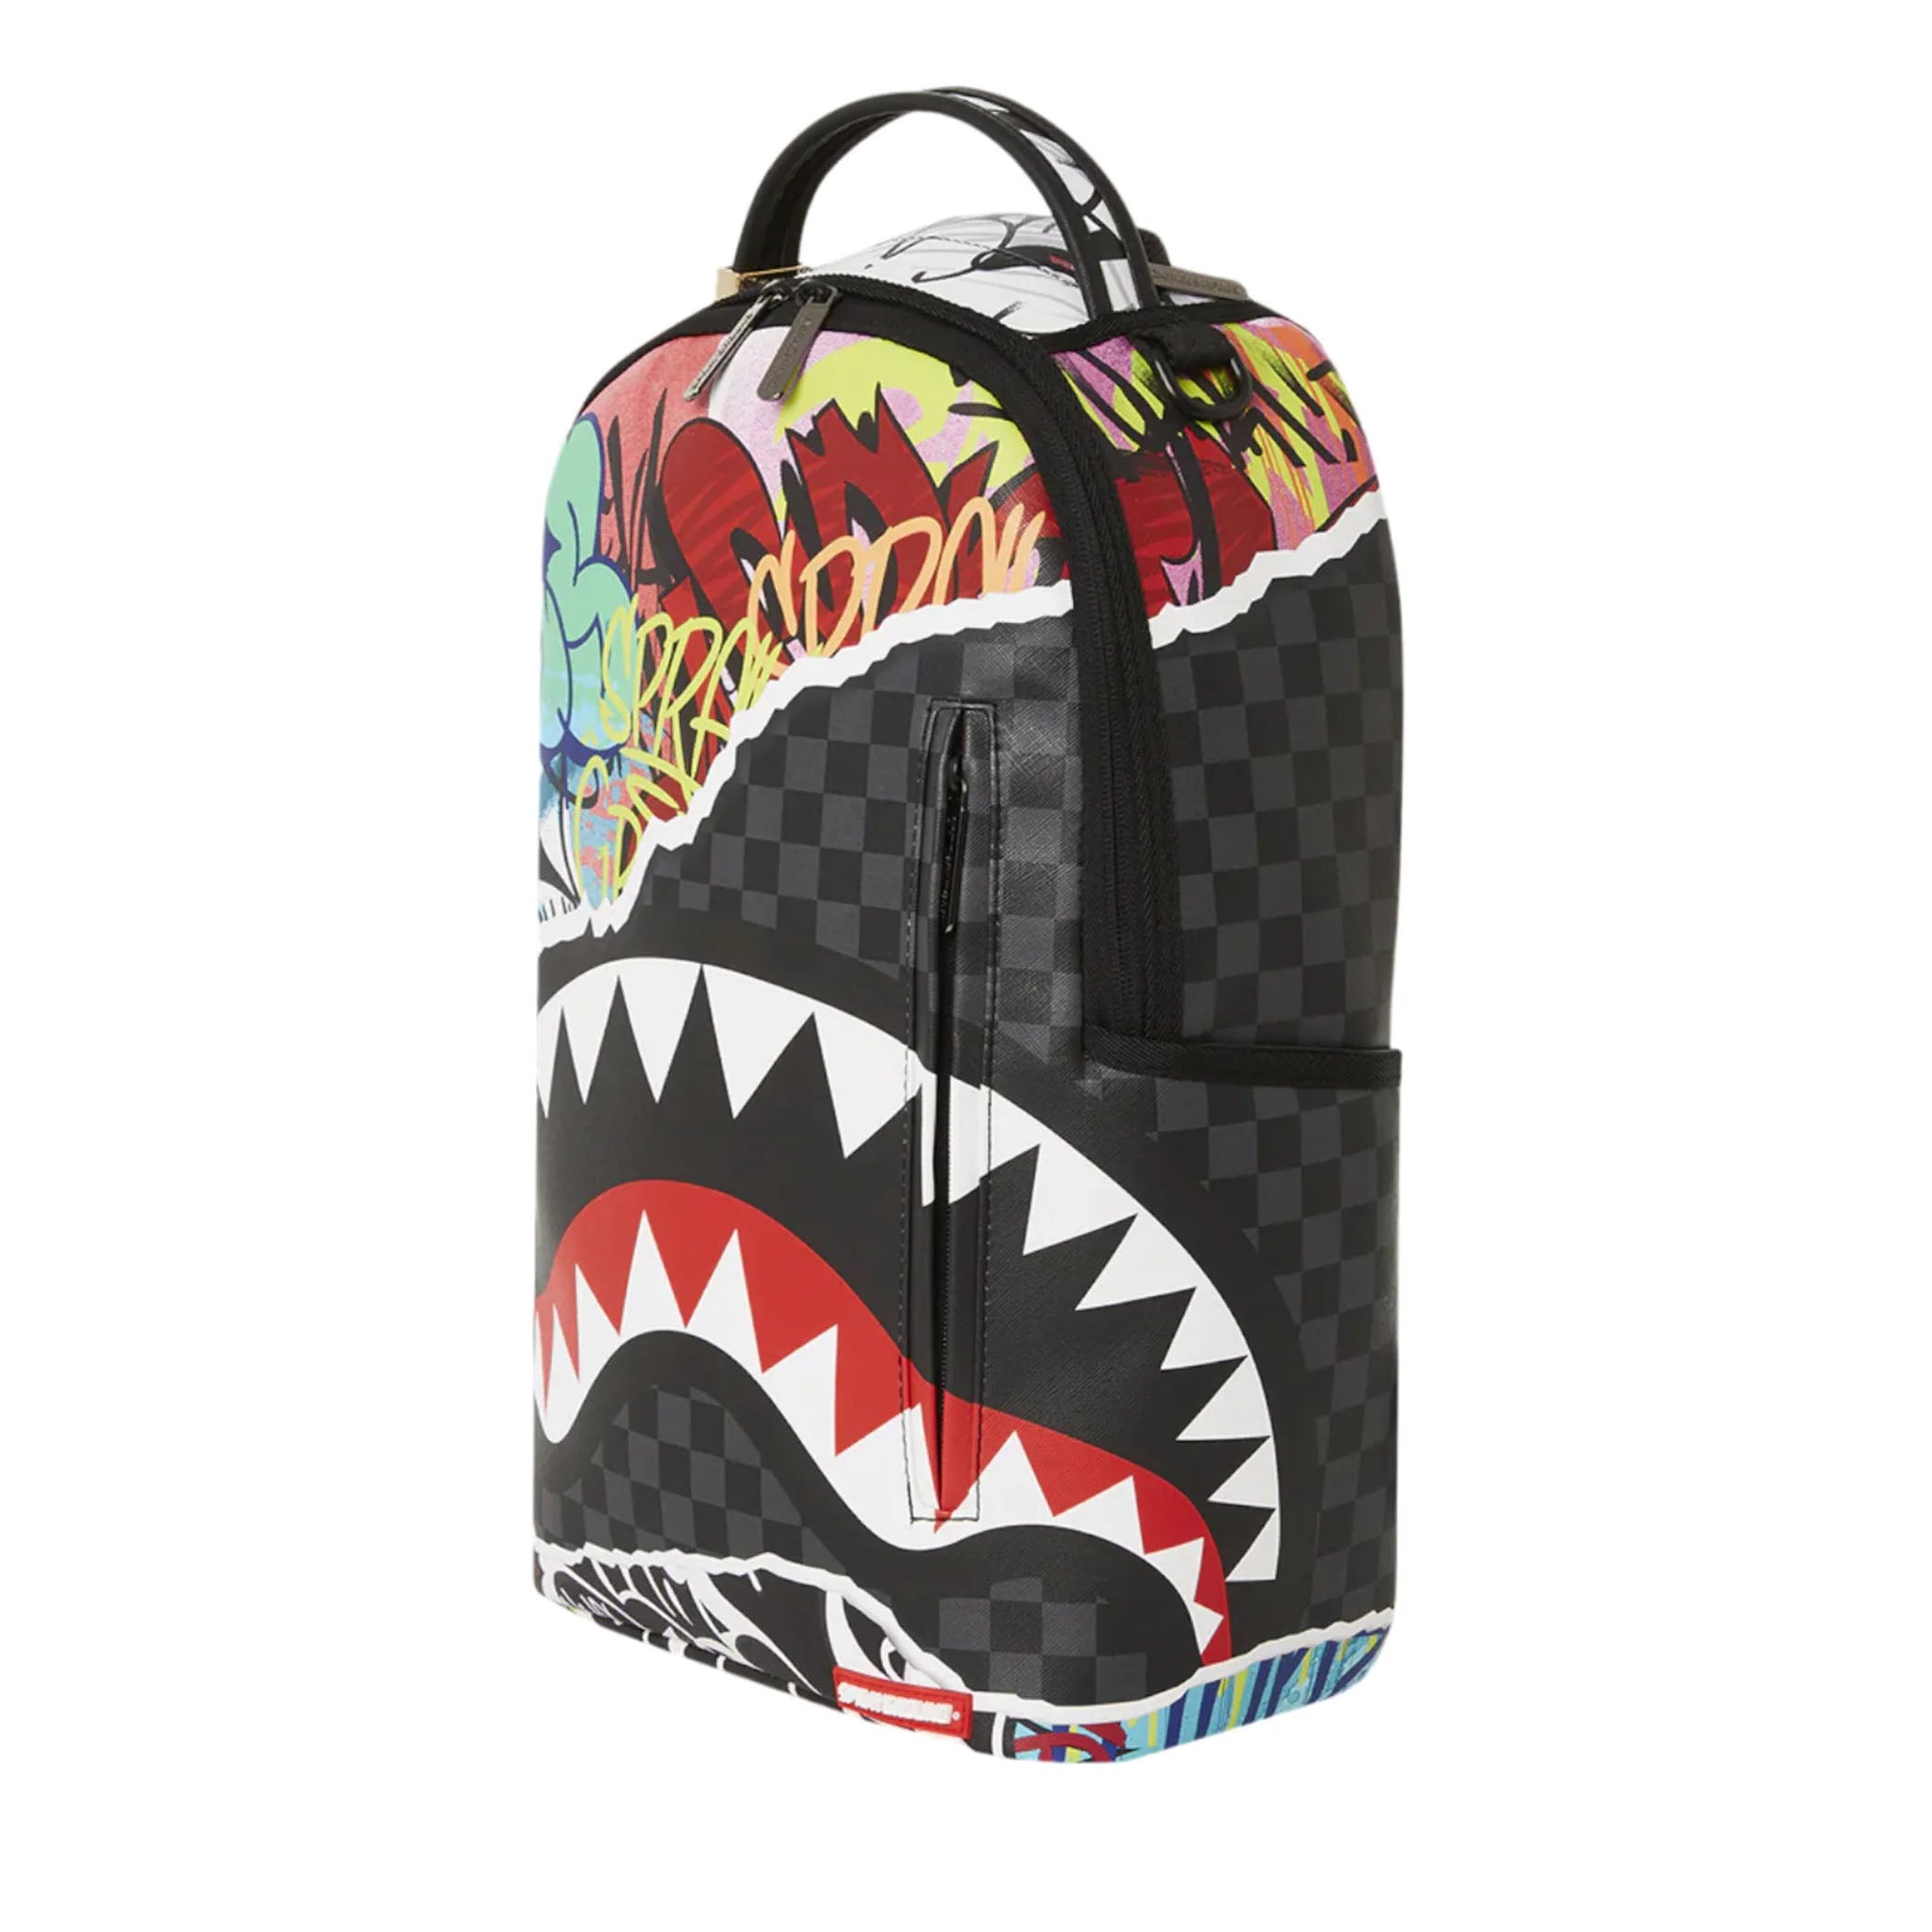 Pull away dlxvf backpack